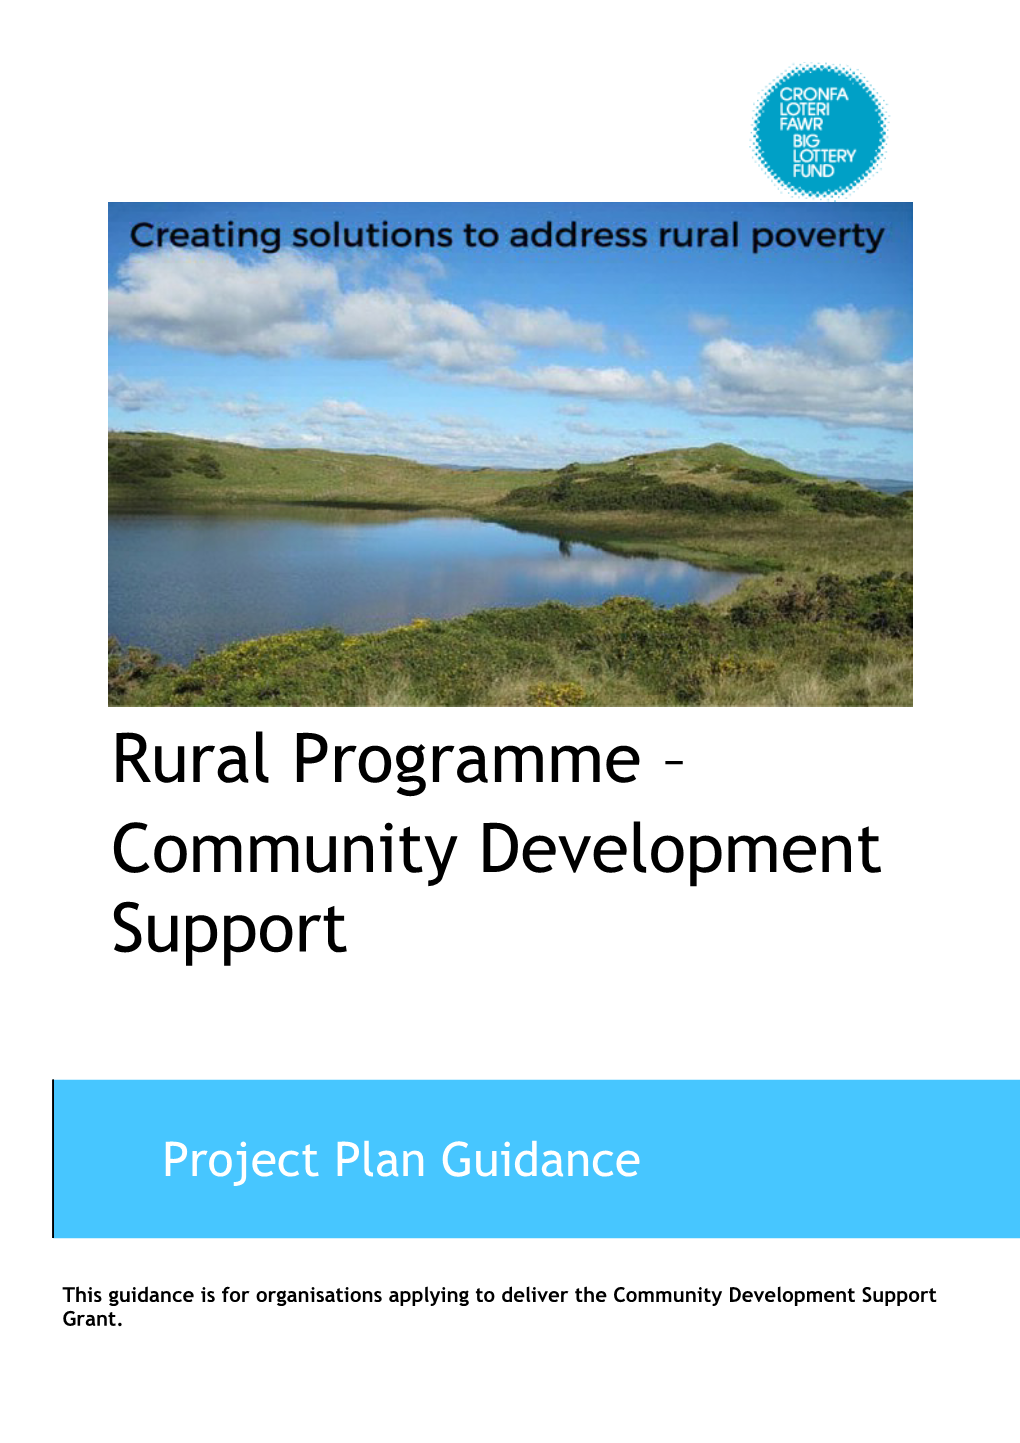 This Guidance Is for Organisations Applying to Deliver the Community Development Support